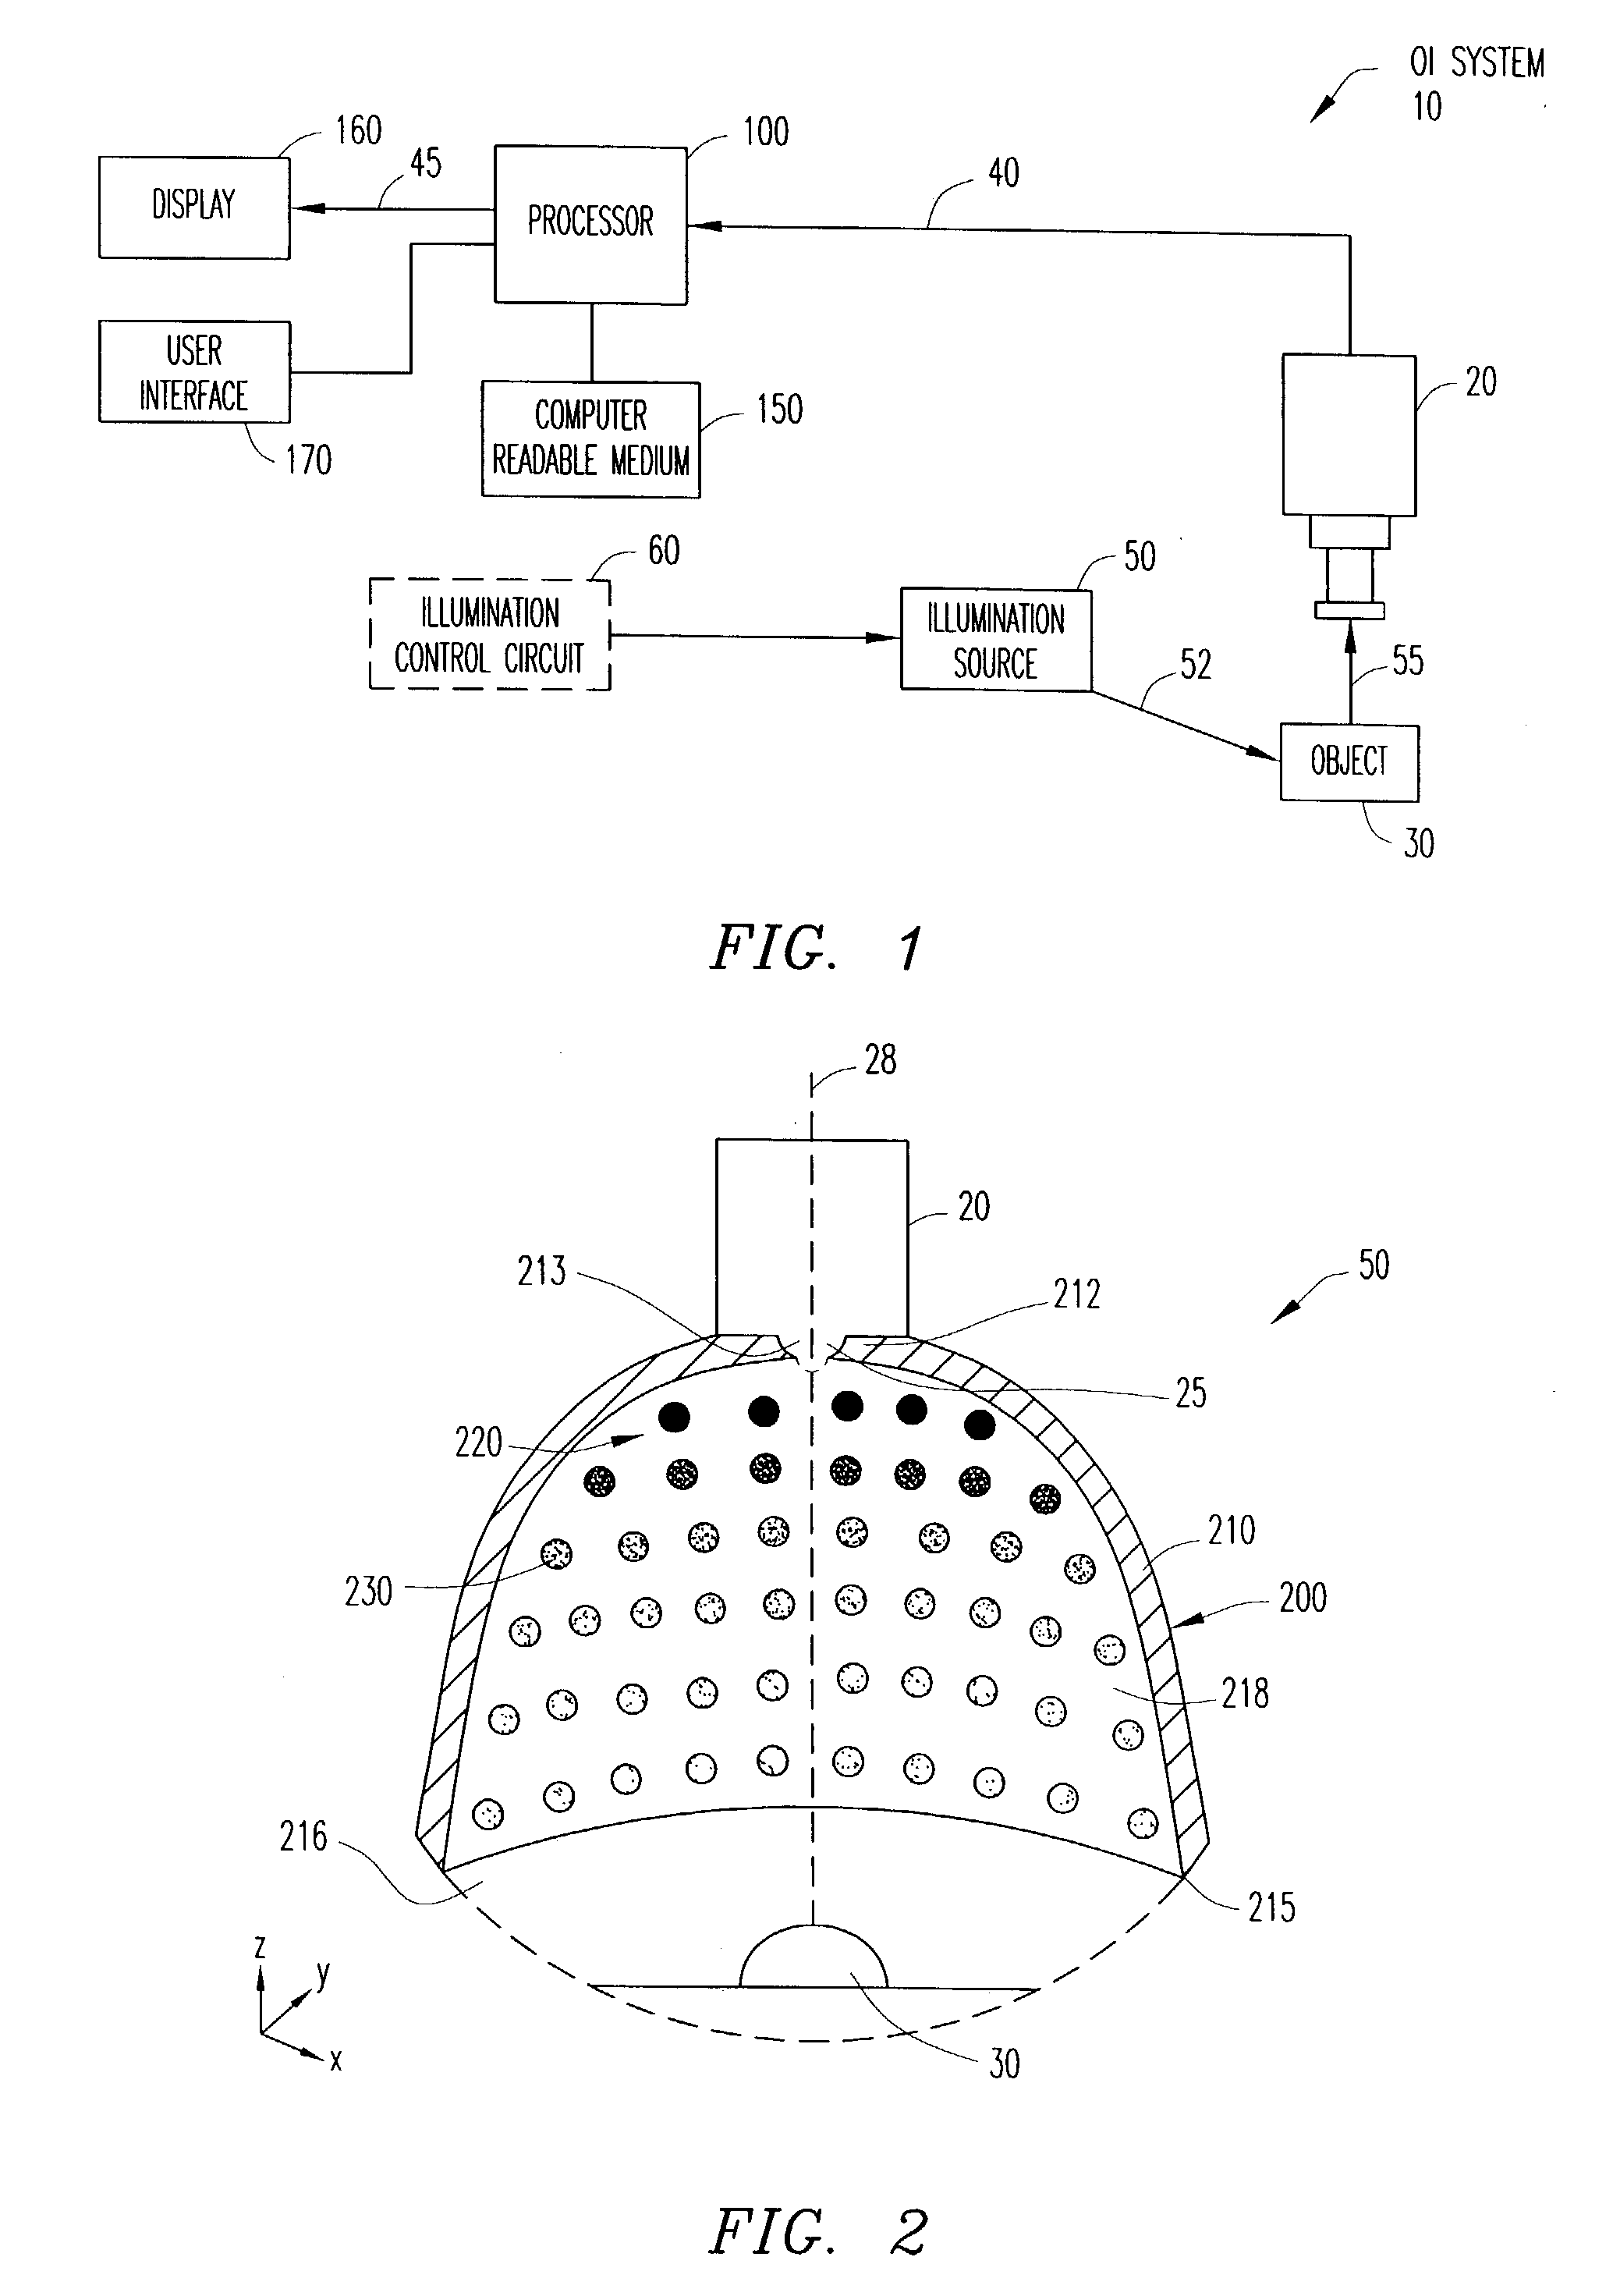 Optical inspection system, illumination apparatus and method for use in imaging specular objects based on illumination gradients